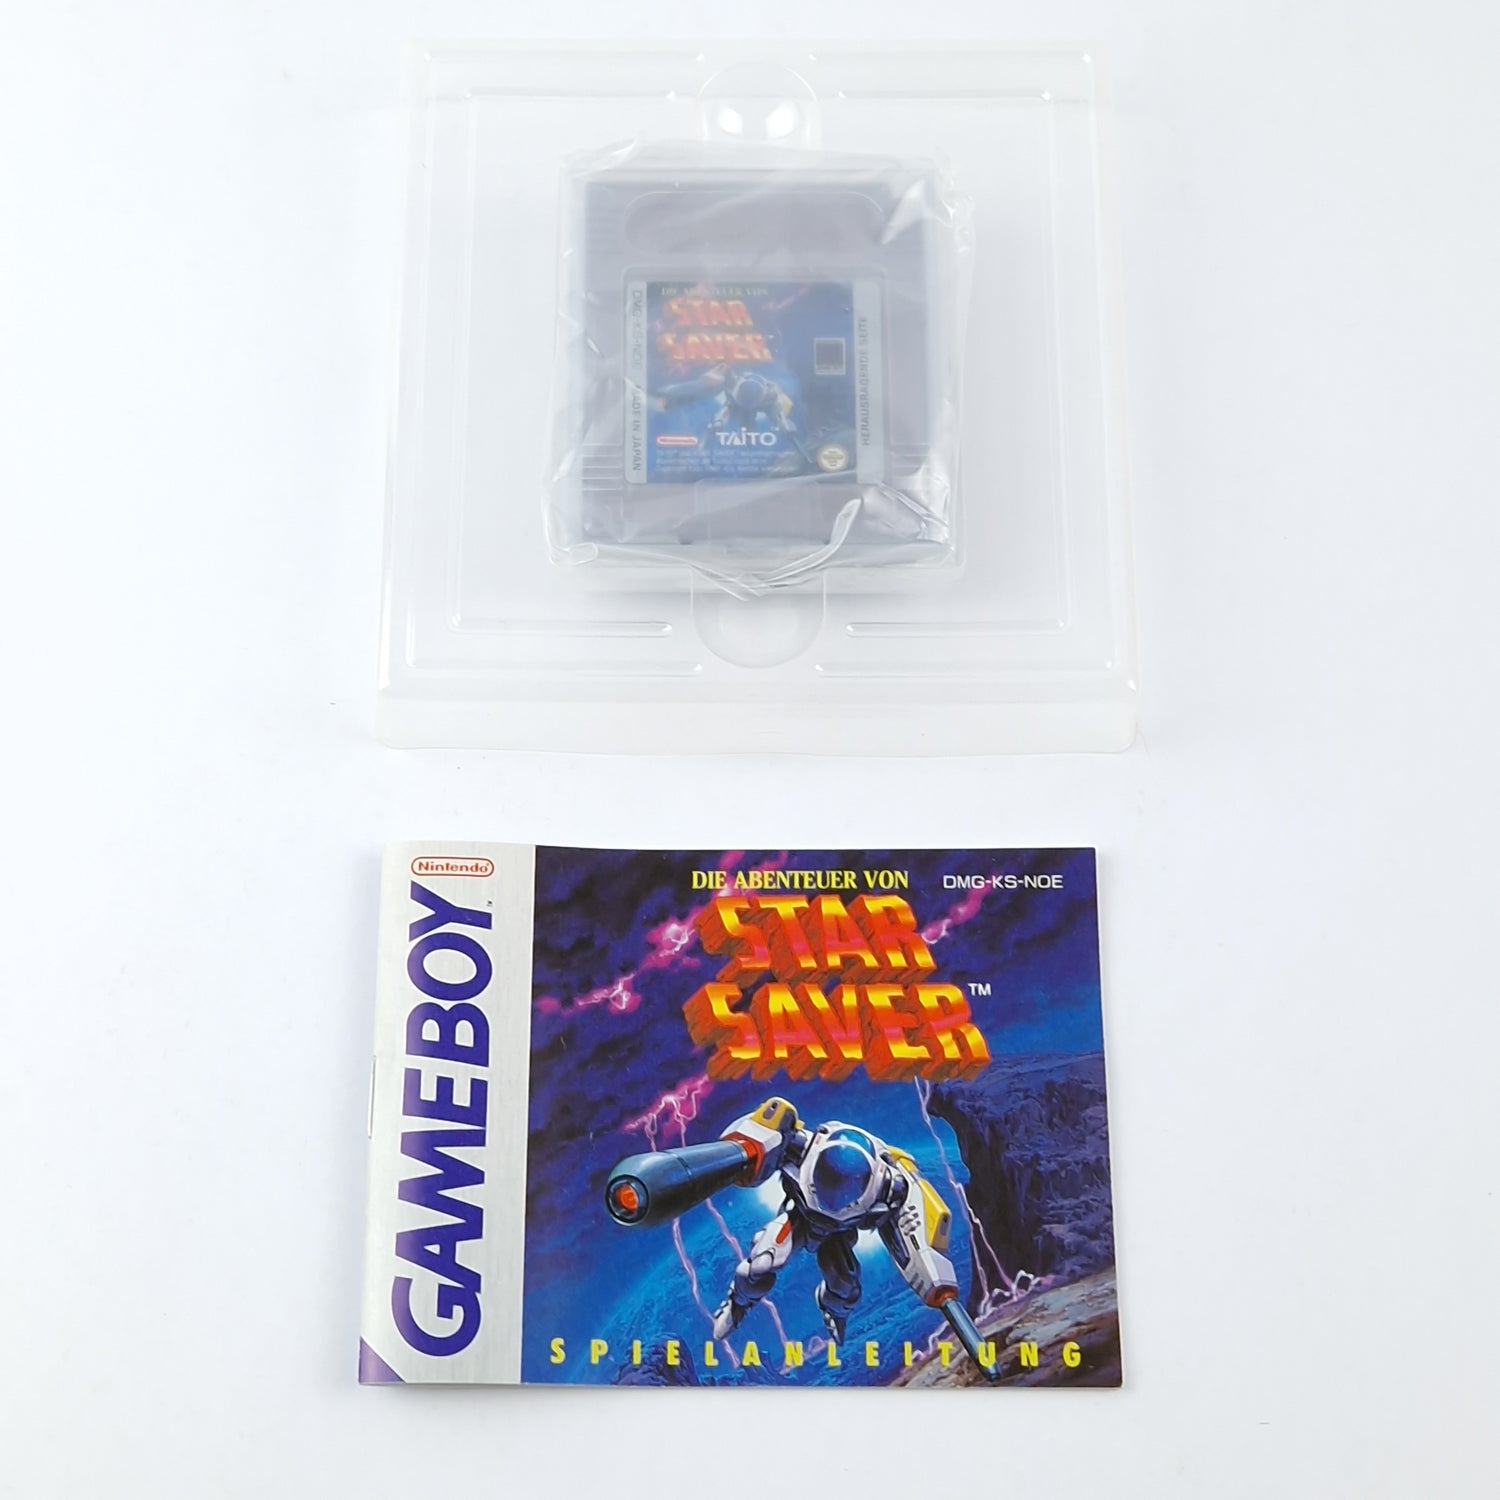 Nintendo Game Boy Classic Game: The Adventures of Star Saver - OVP instructions